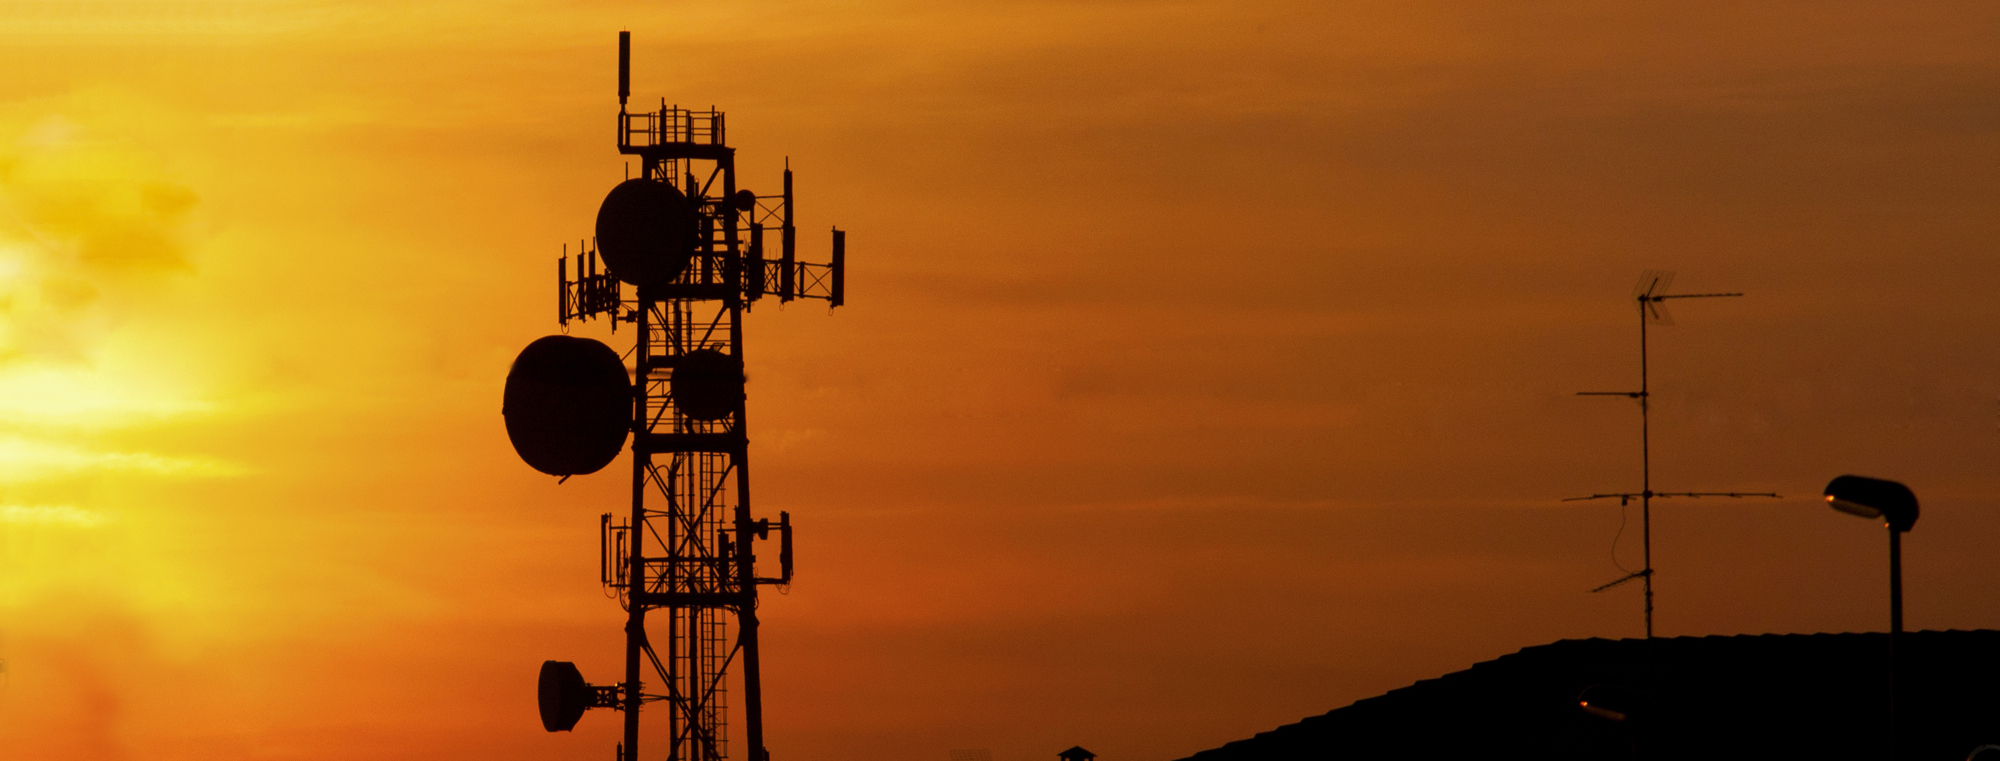 telecom wallpaper,sky,afterglow,telecommunications engineering,sunset,electricity